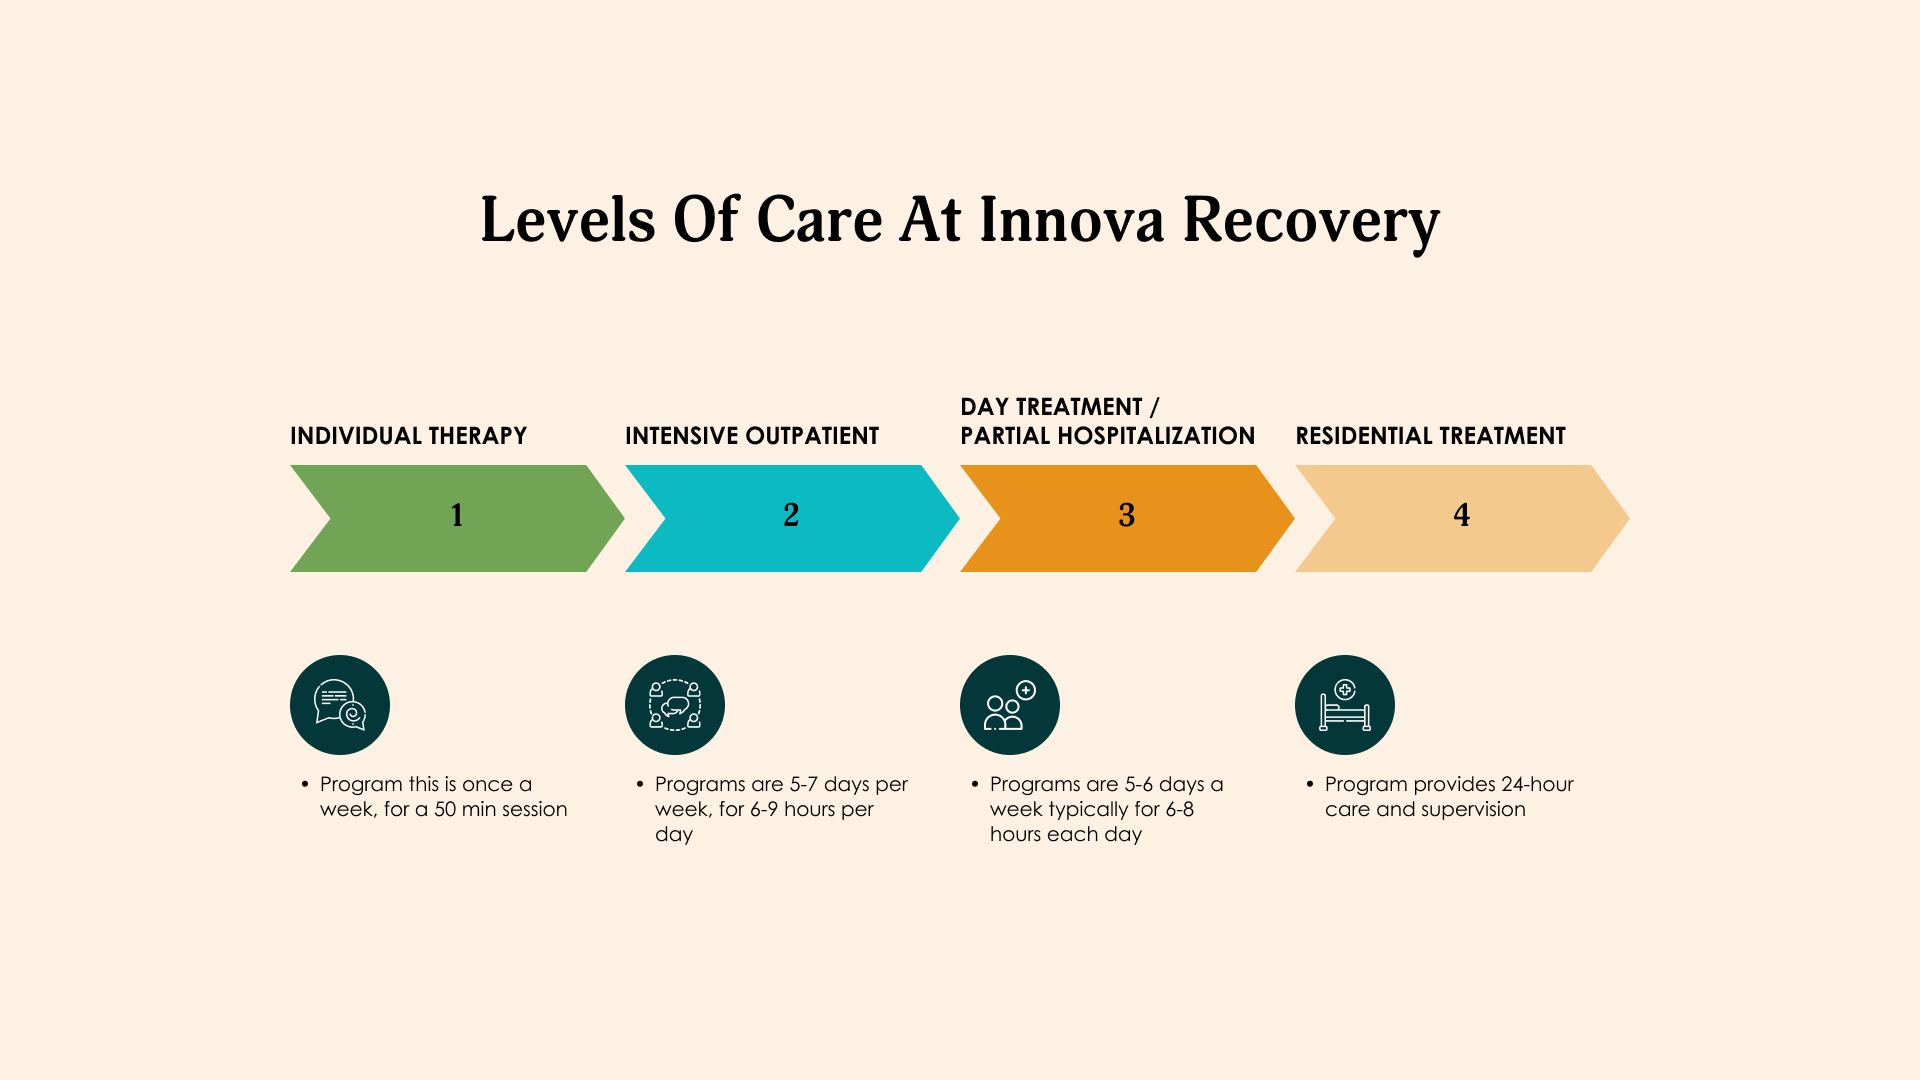 Understanding The Levels of Care